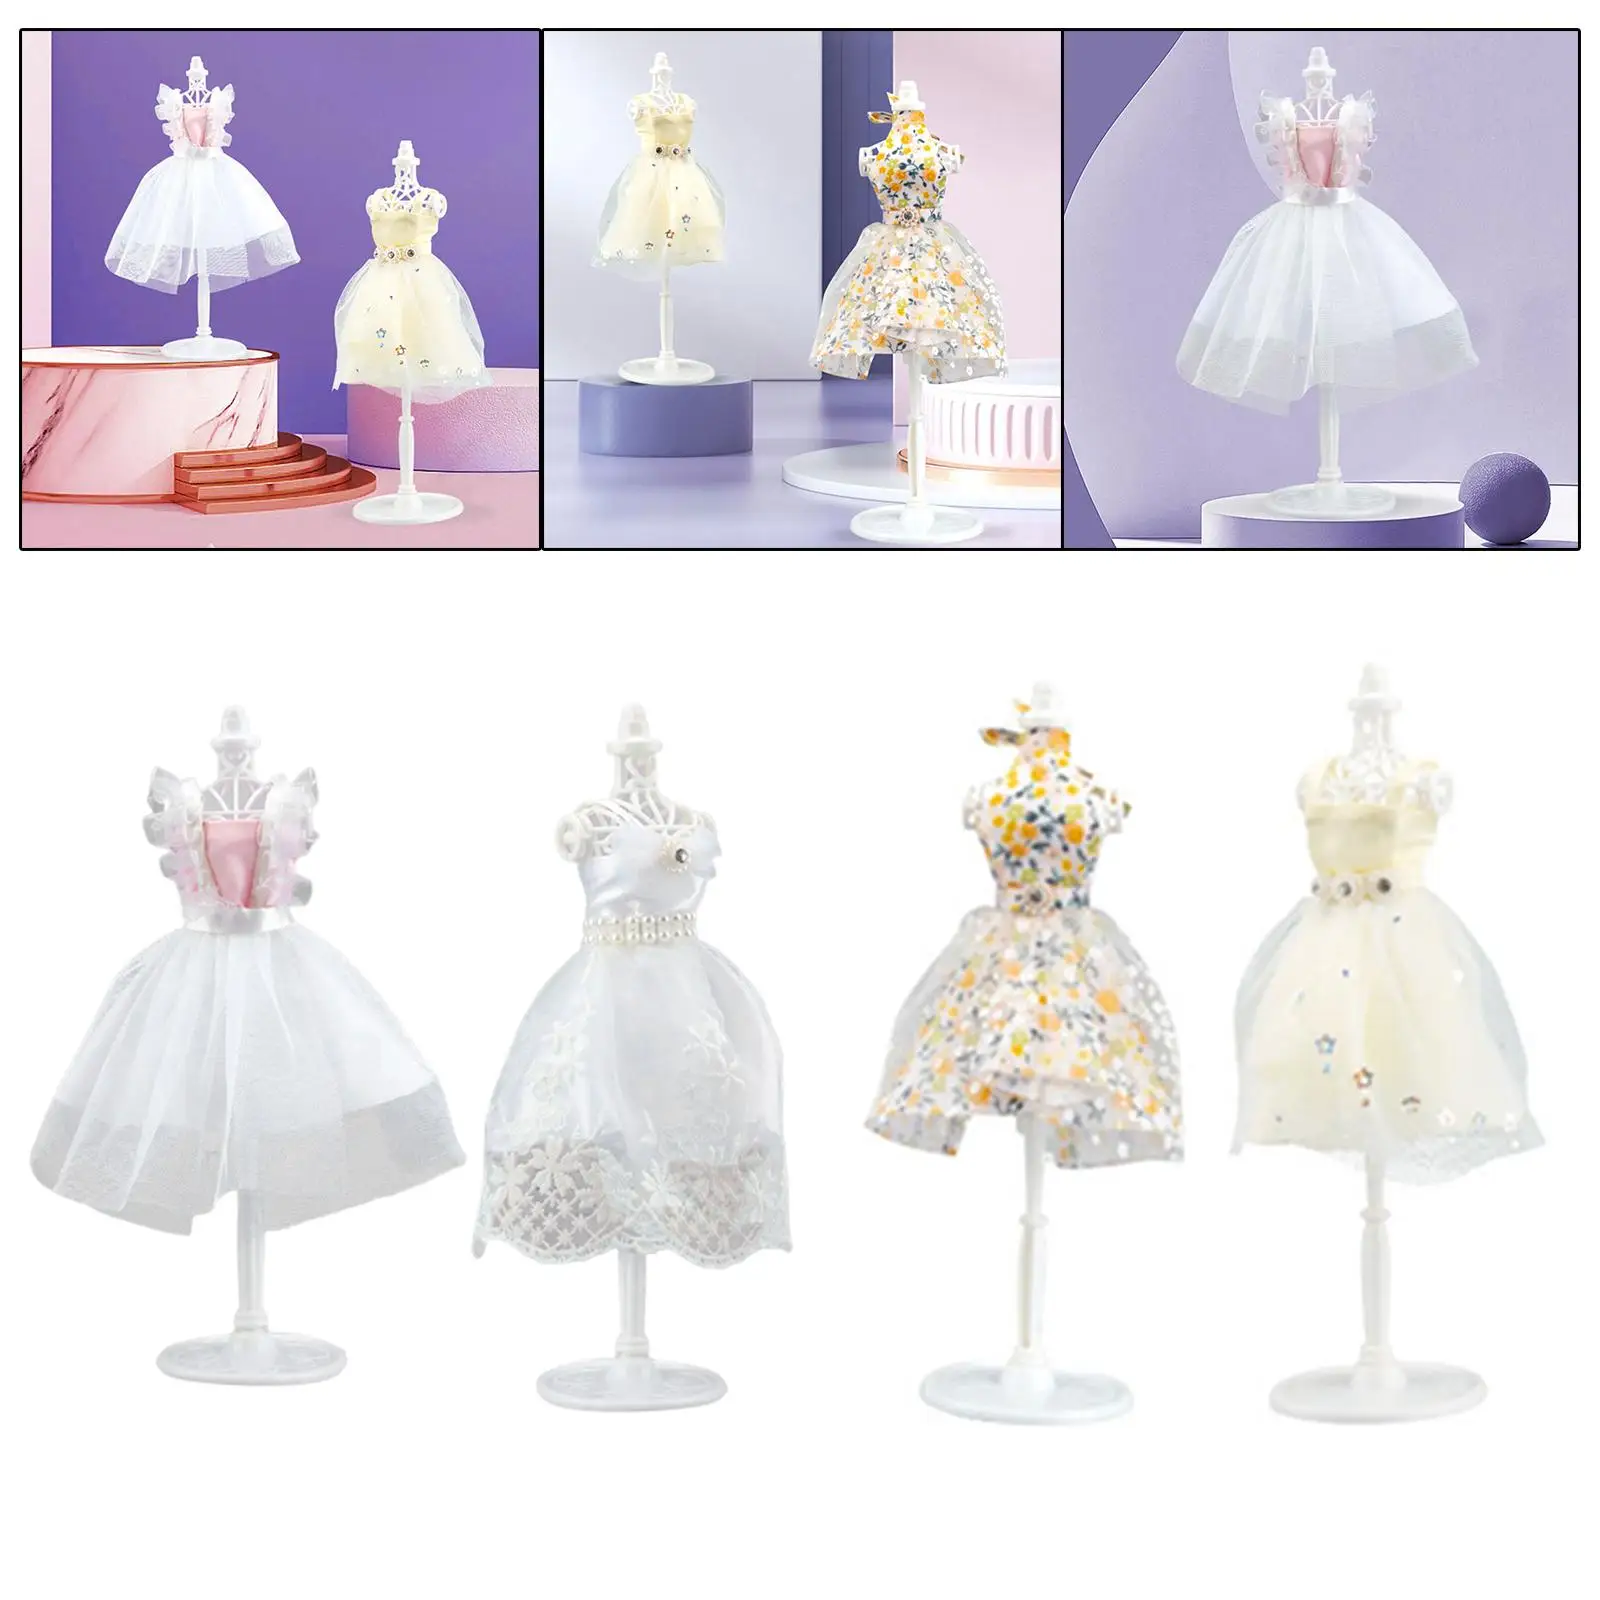 Doll Clothing design Learning Toys Doll Dress Making Set Creativity dress up Design Kit for Birthday Gift Party